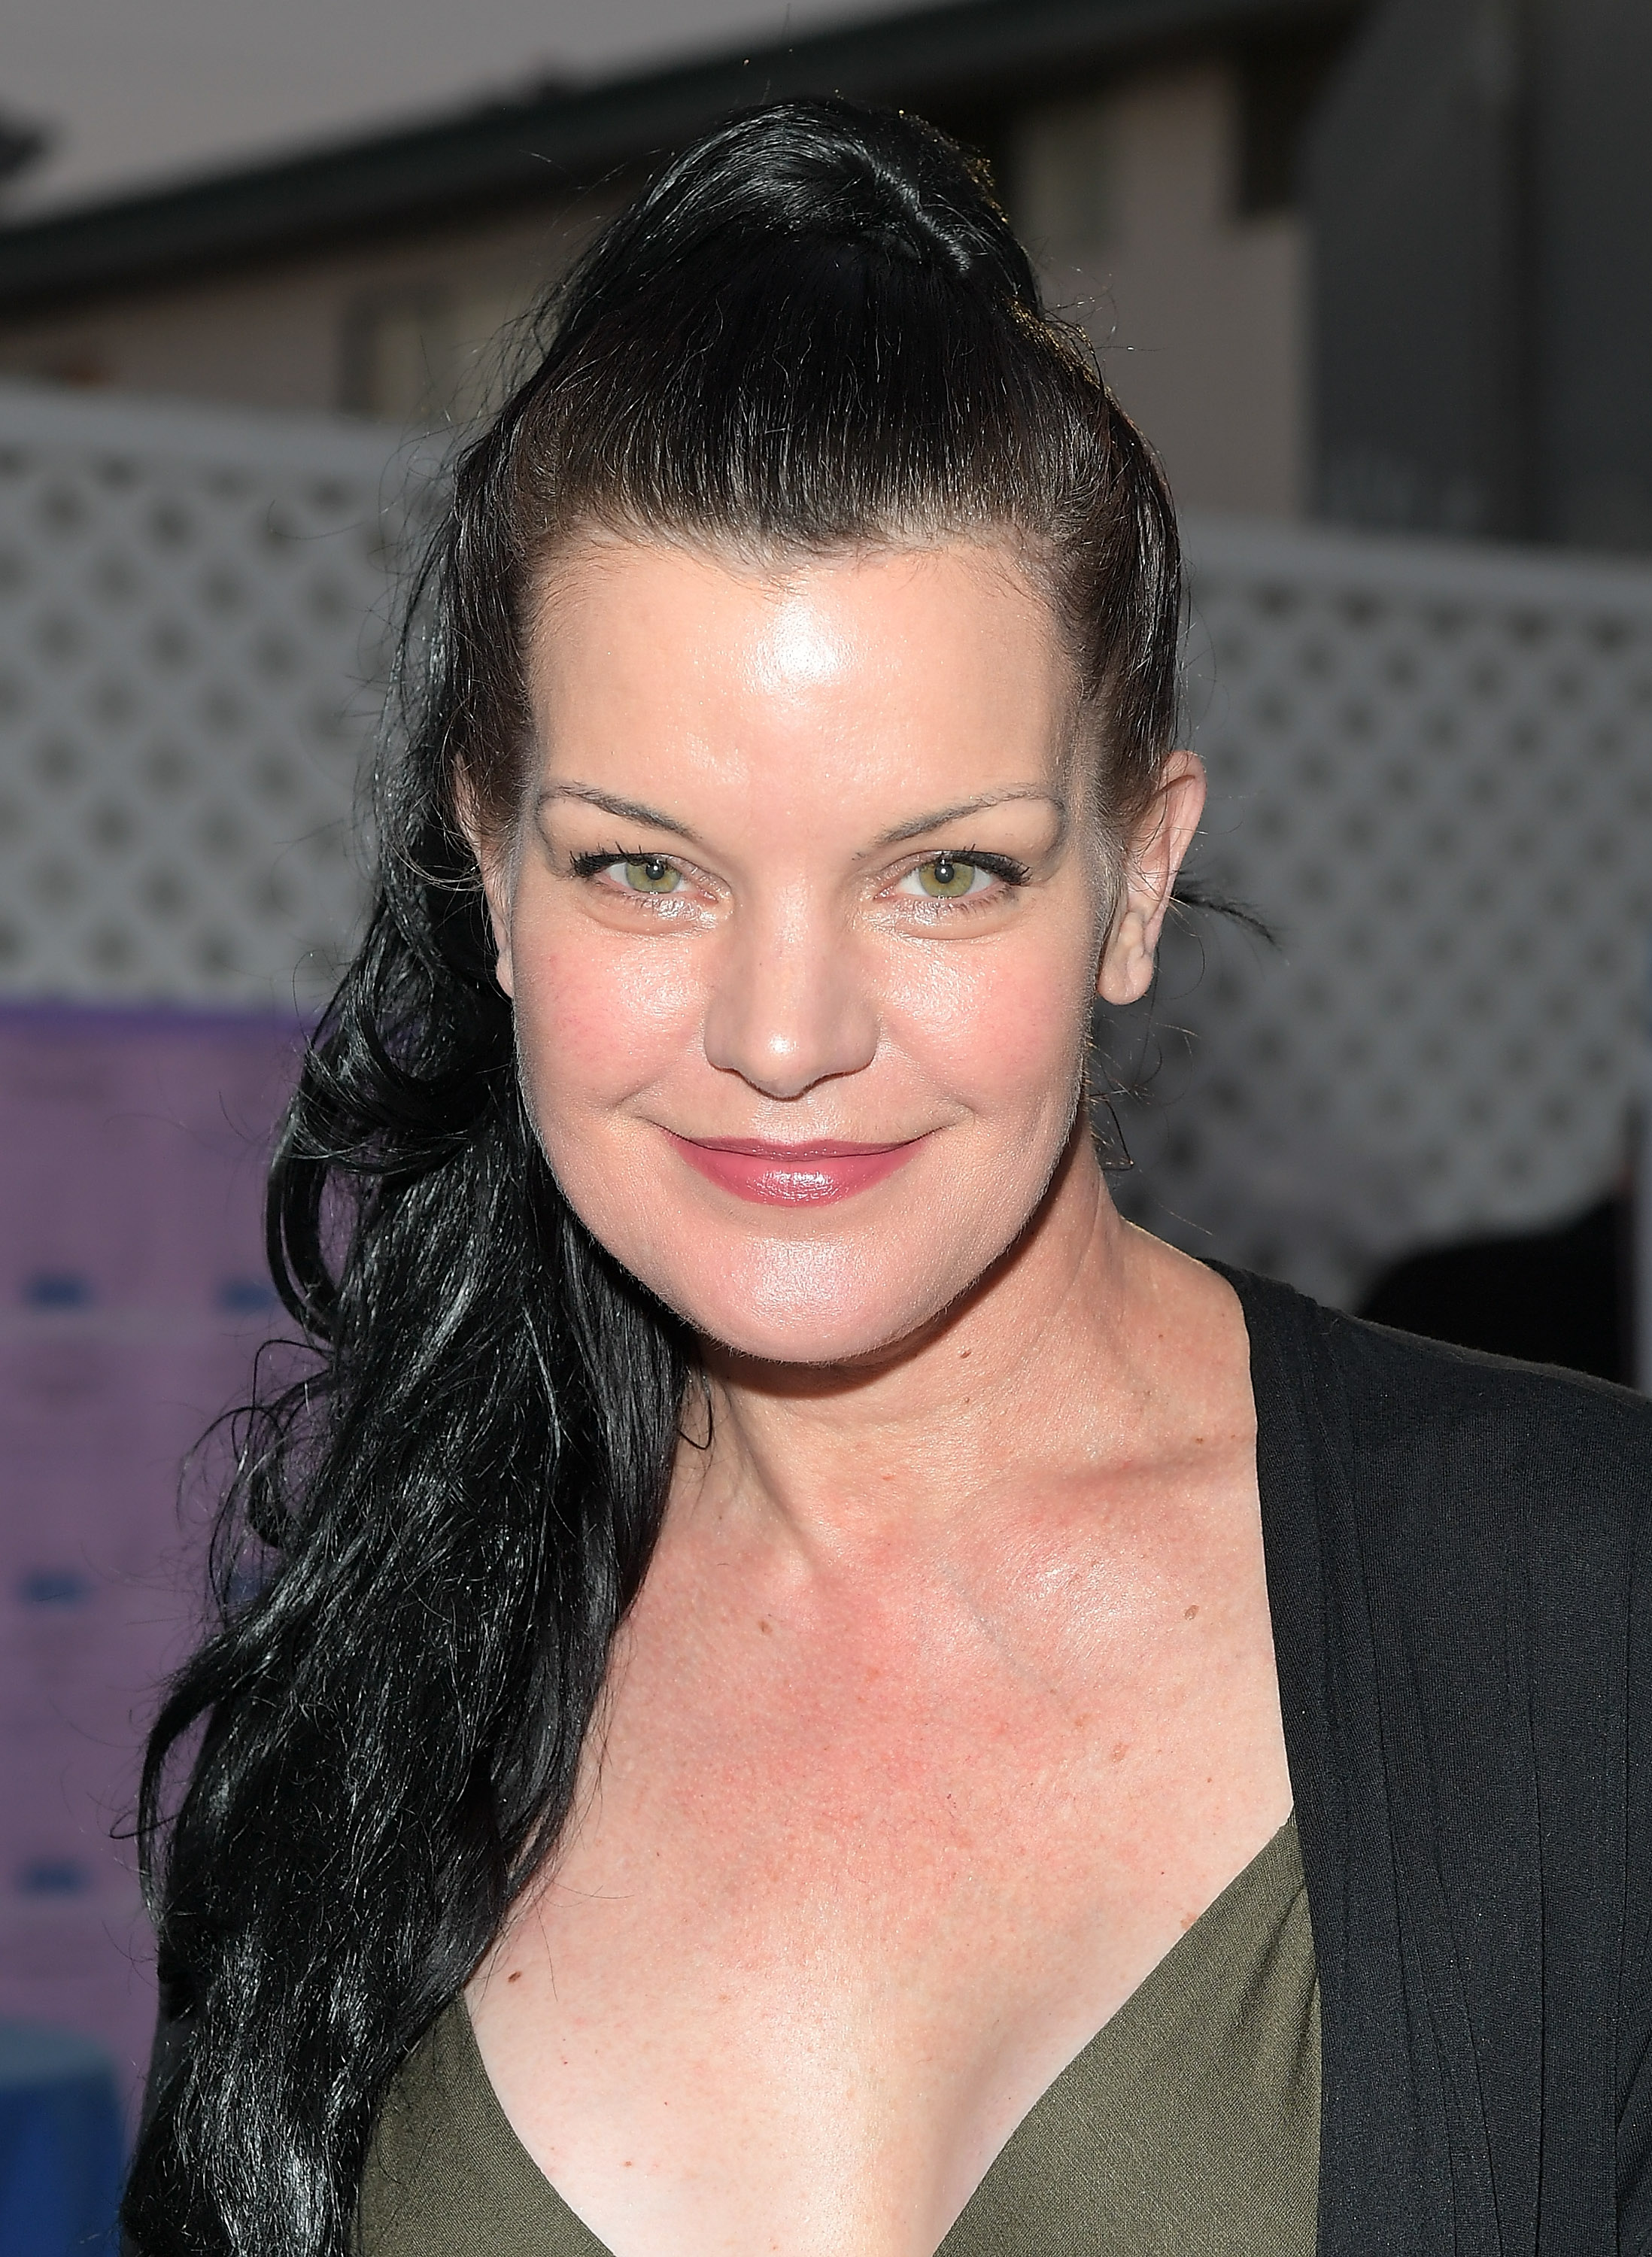 Pauley Perrette attends Project Angel Food's Angel Awards in Hollywood, California, on August 18, 2018. | Source: Getty Images